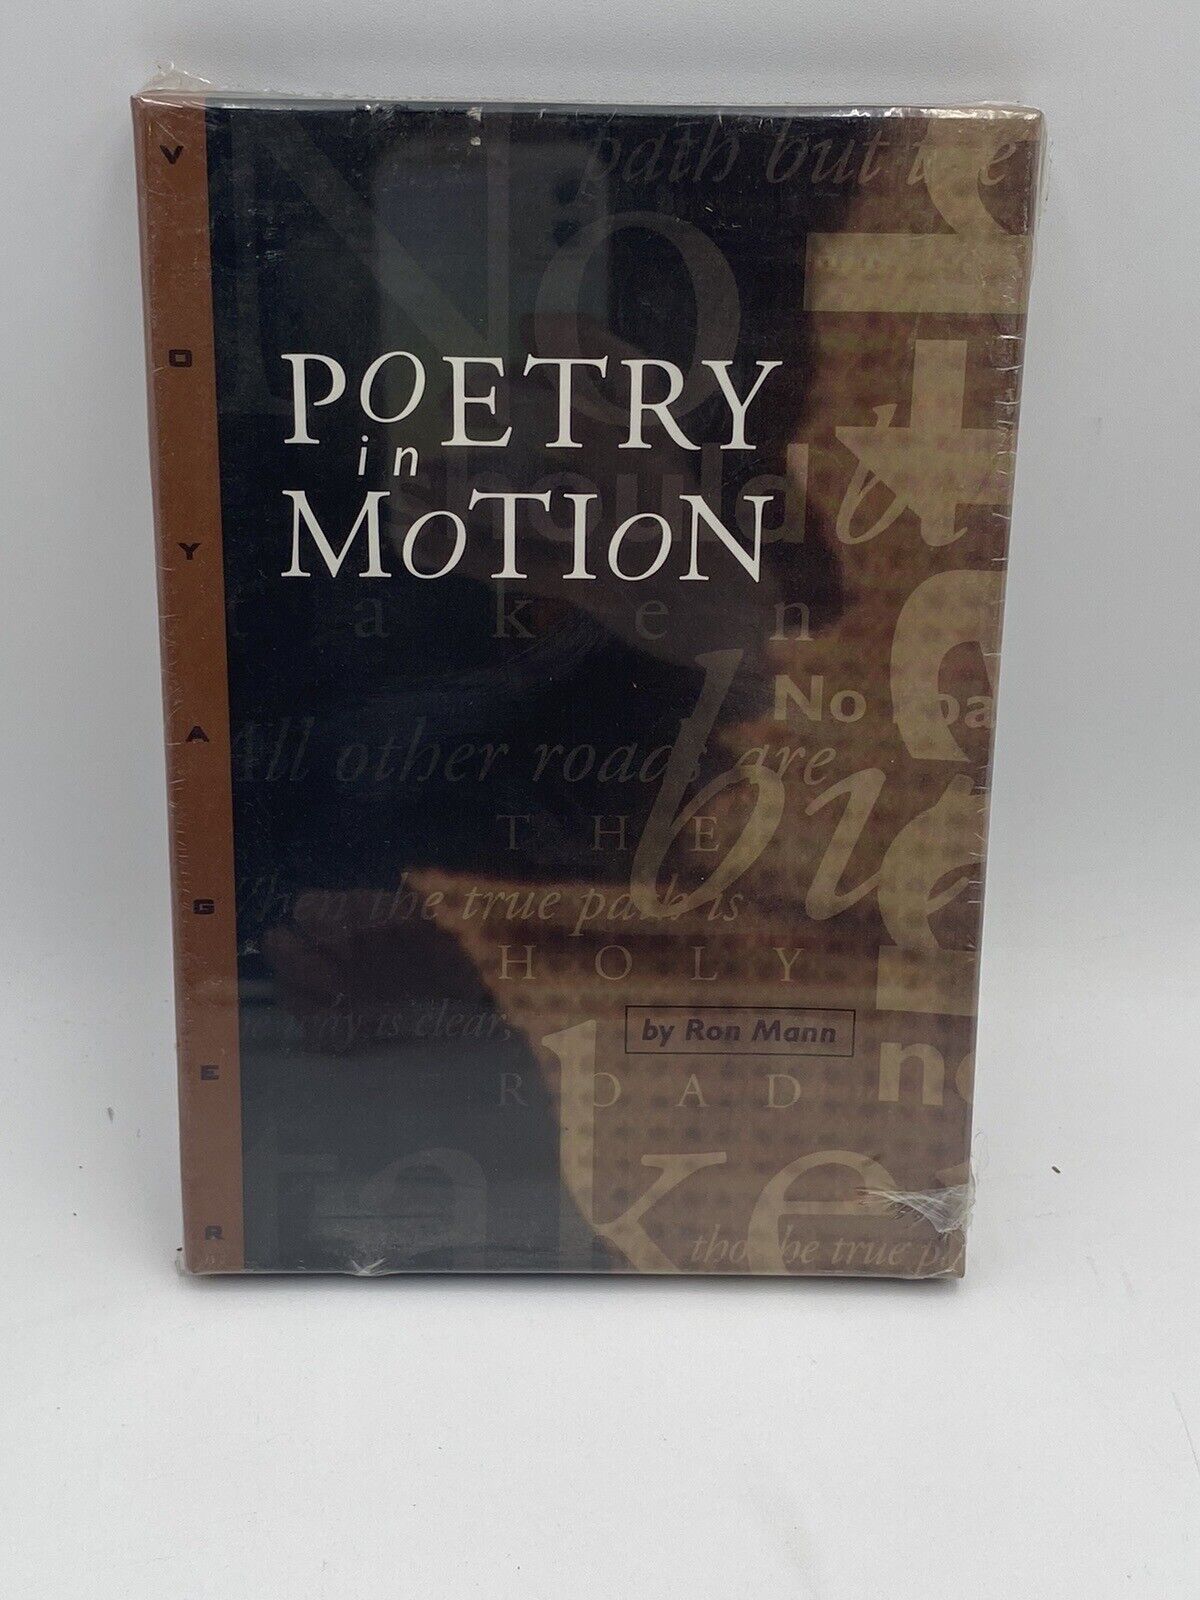 Poetry In Motion by Ron Mann (CD-ROM) Rare OOP Voyager - PC WIN or MAC